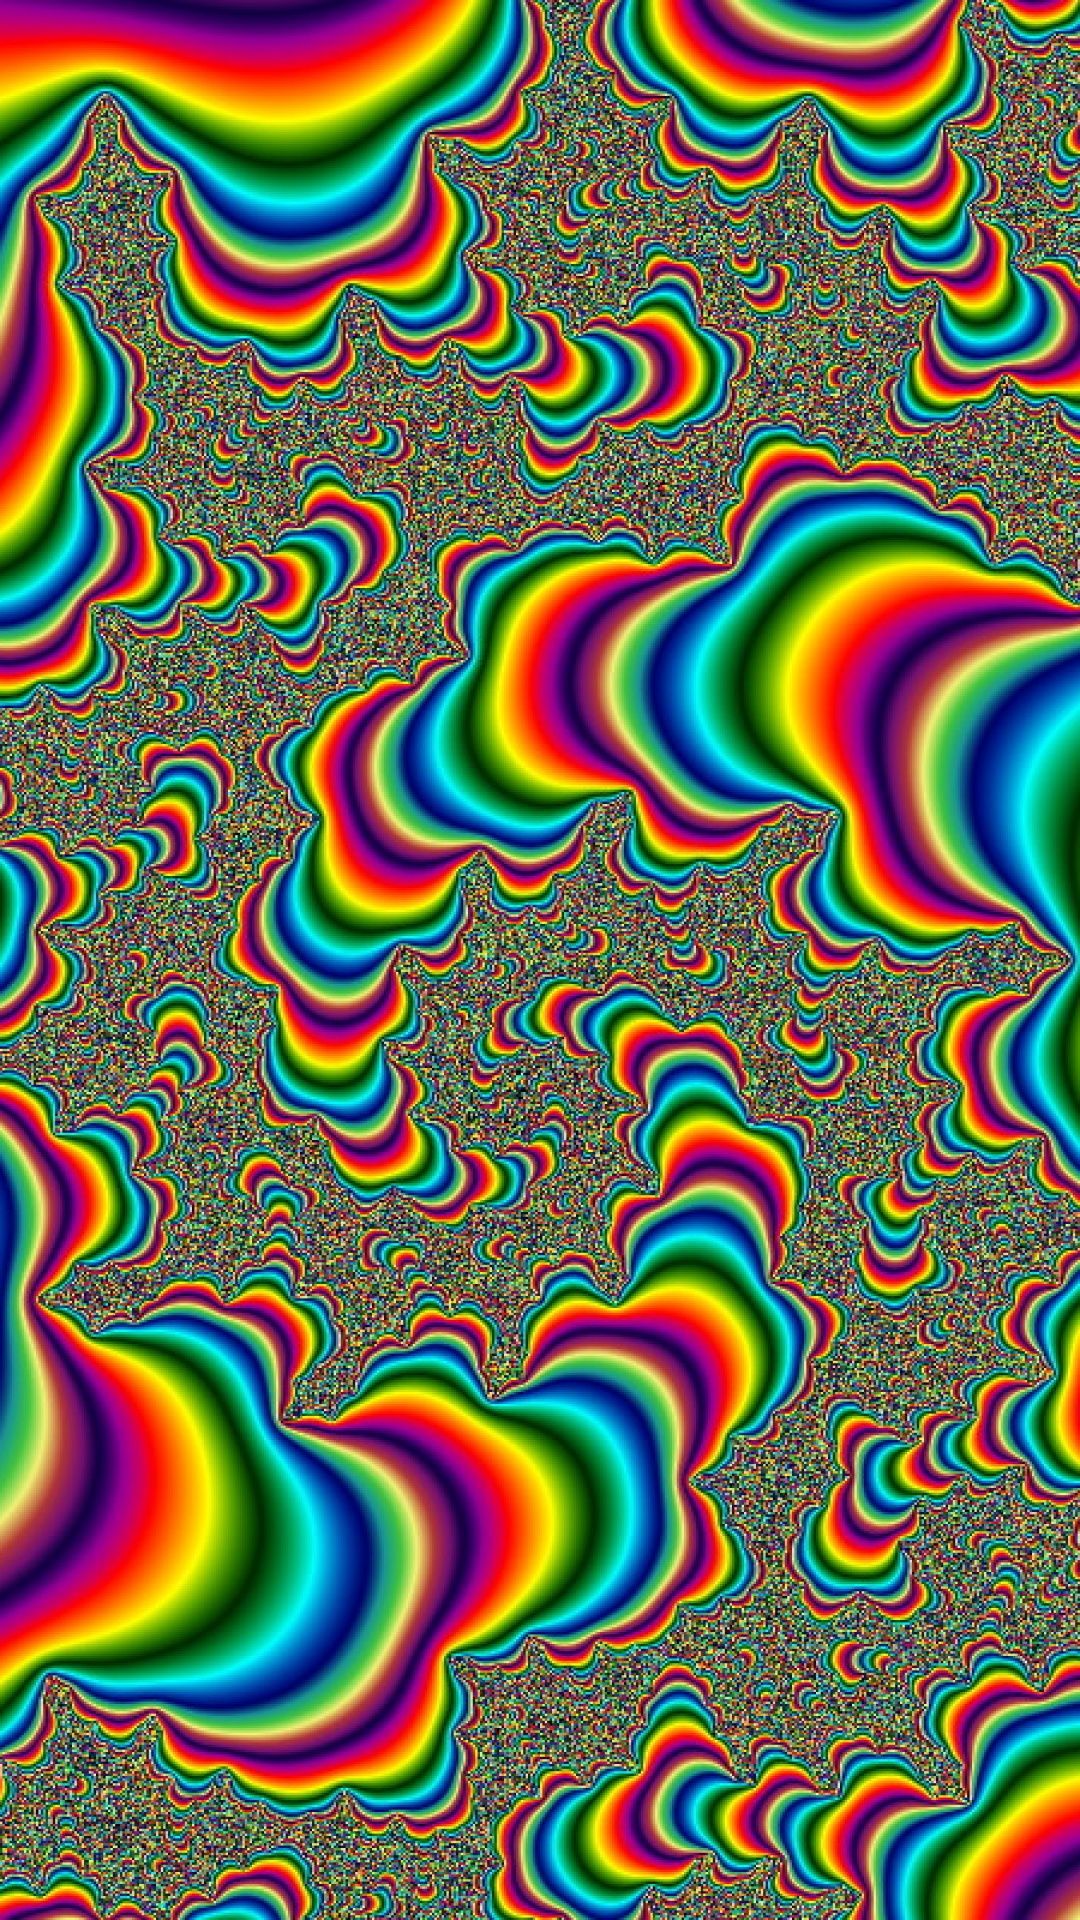 Background Psychedelic Wallpaper